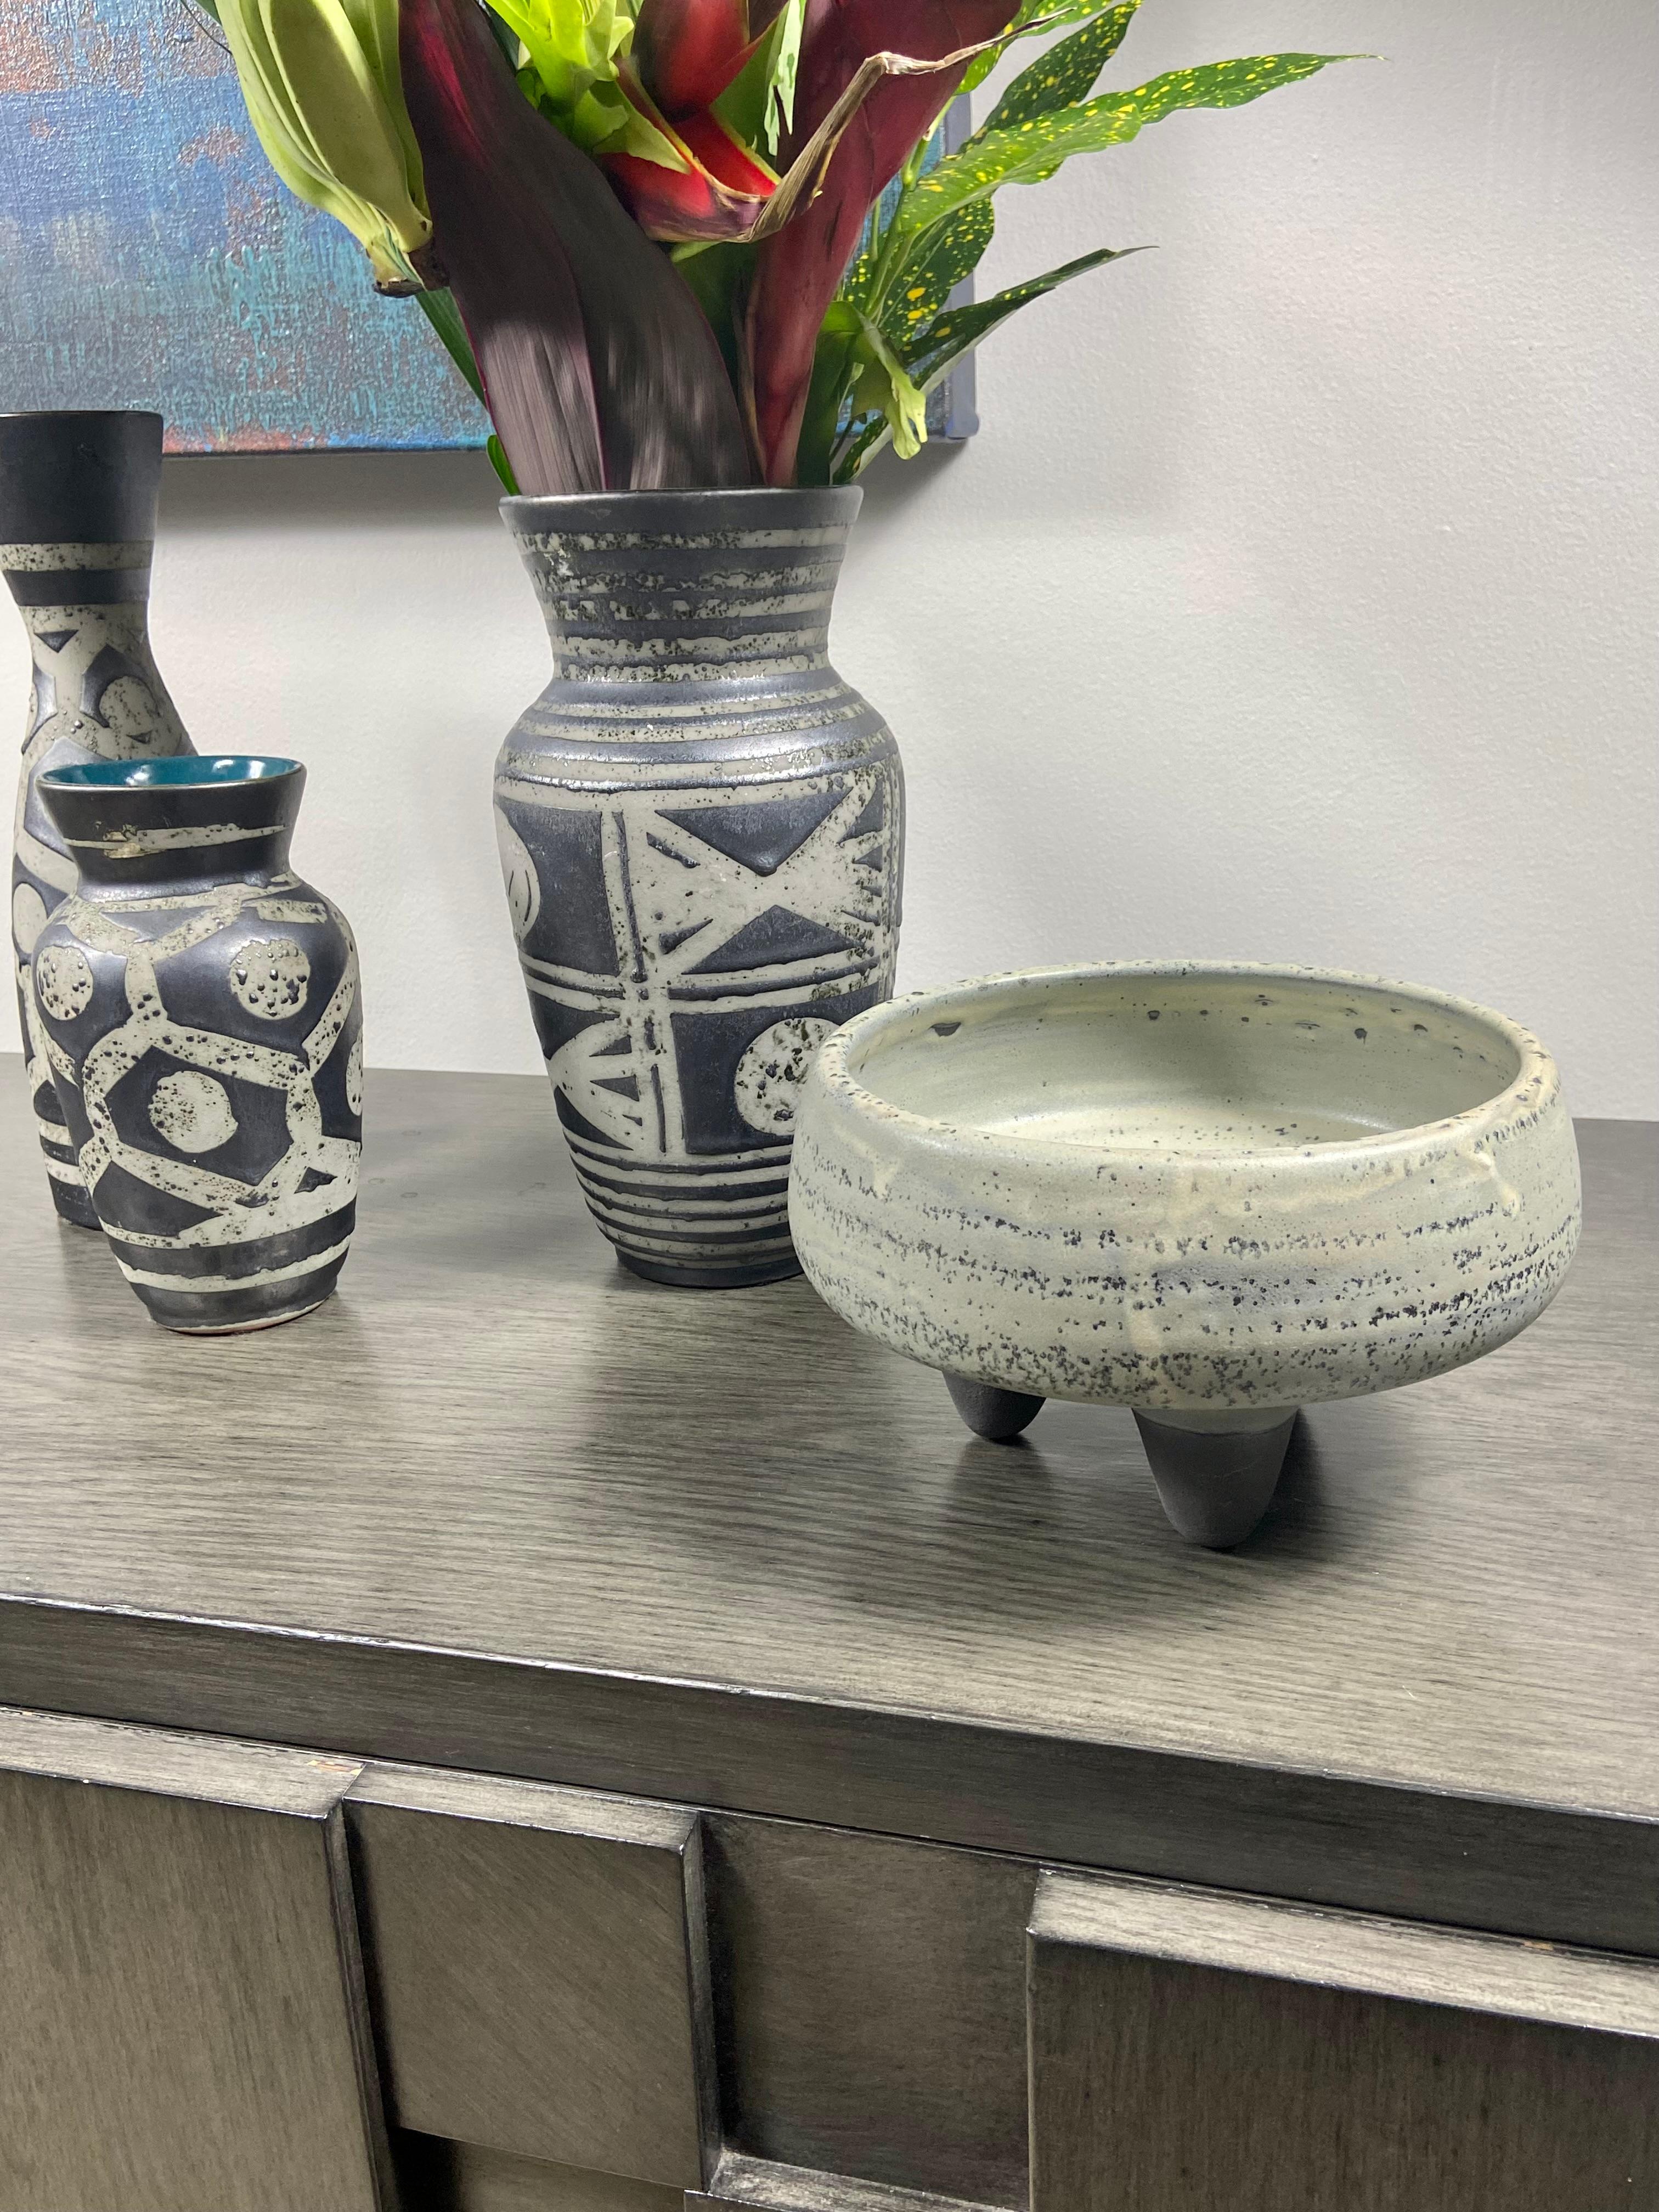 A ceramic speckled 3-footed Mid-Cenrury inspired succulent planter or bowl. It has a beautiful mottled glaze in a sage/gray tone with charcoal glazed matte feet. It can be used as a fruit bowl and is food safe.